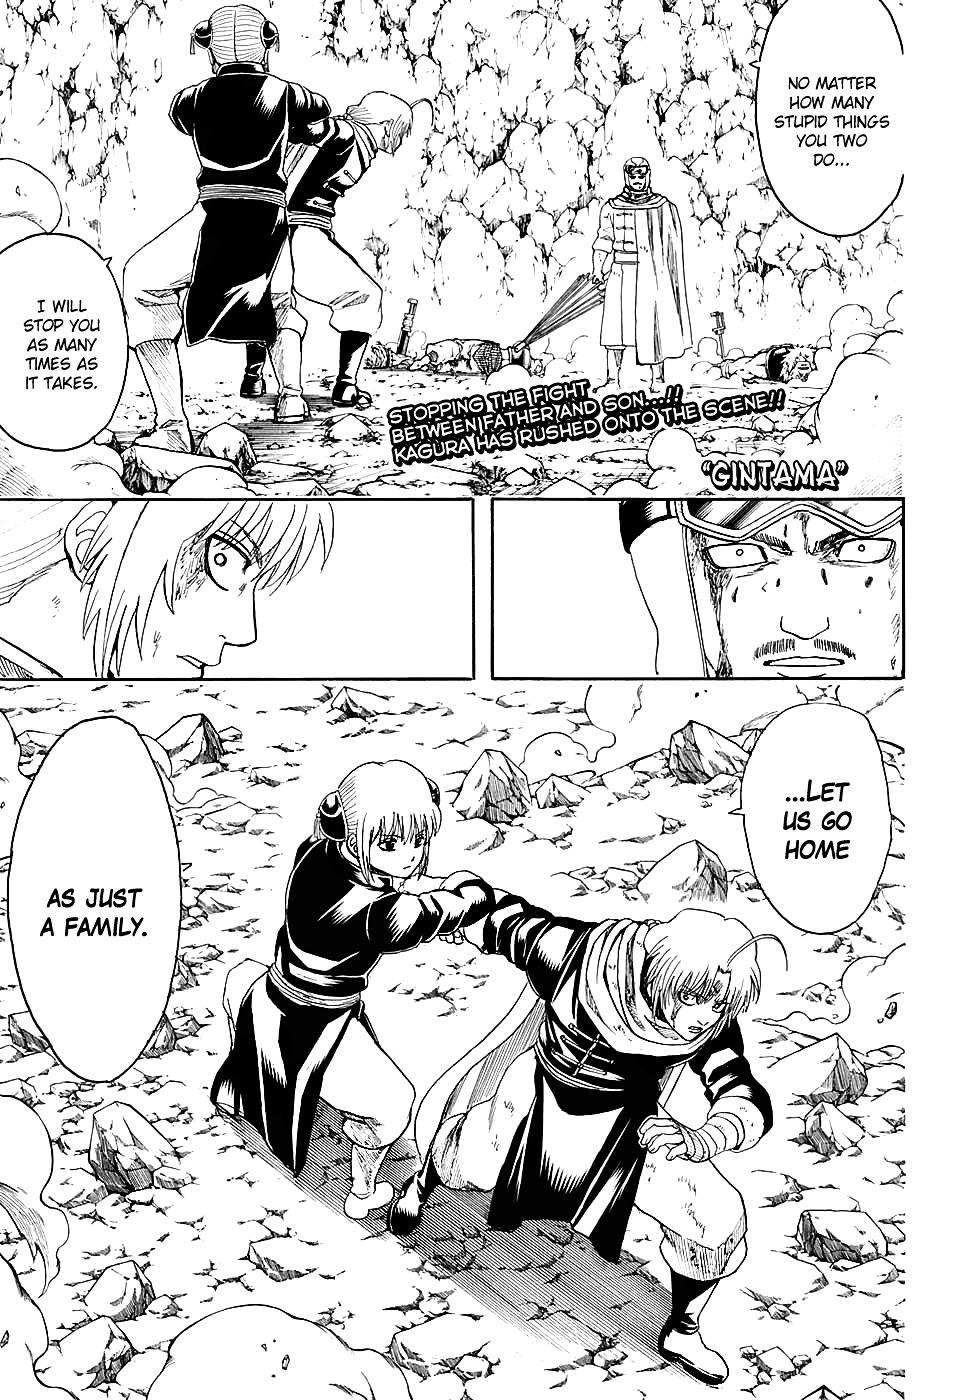 Gintama Vol.64 Chapter 577 : Crybaby - Picture 1